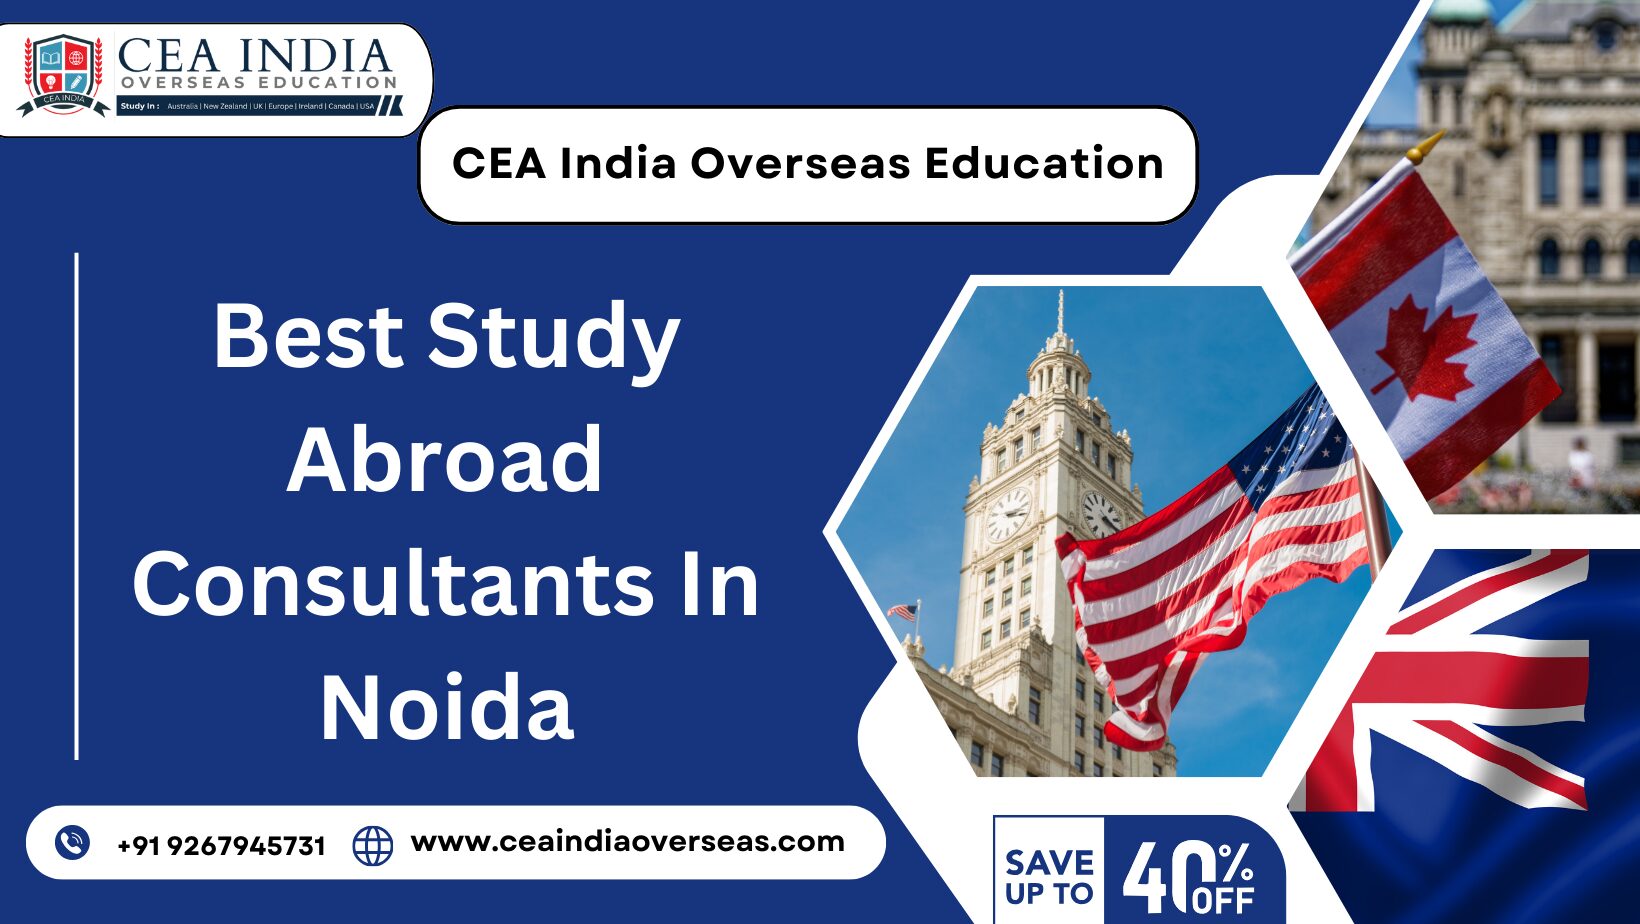 Best Study Abroad Consultants in Noida